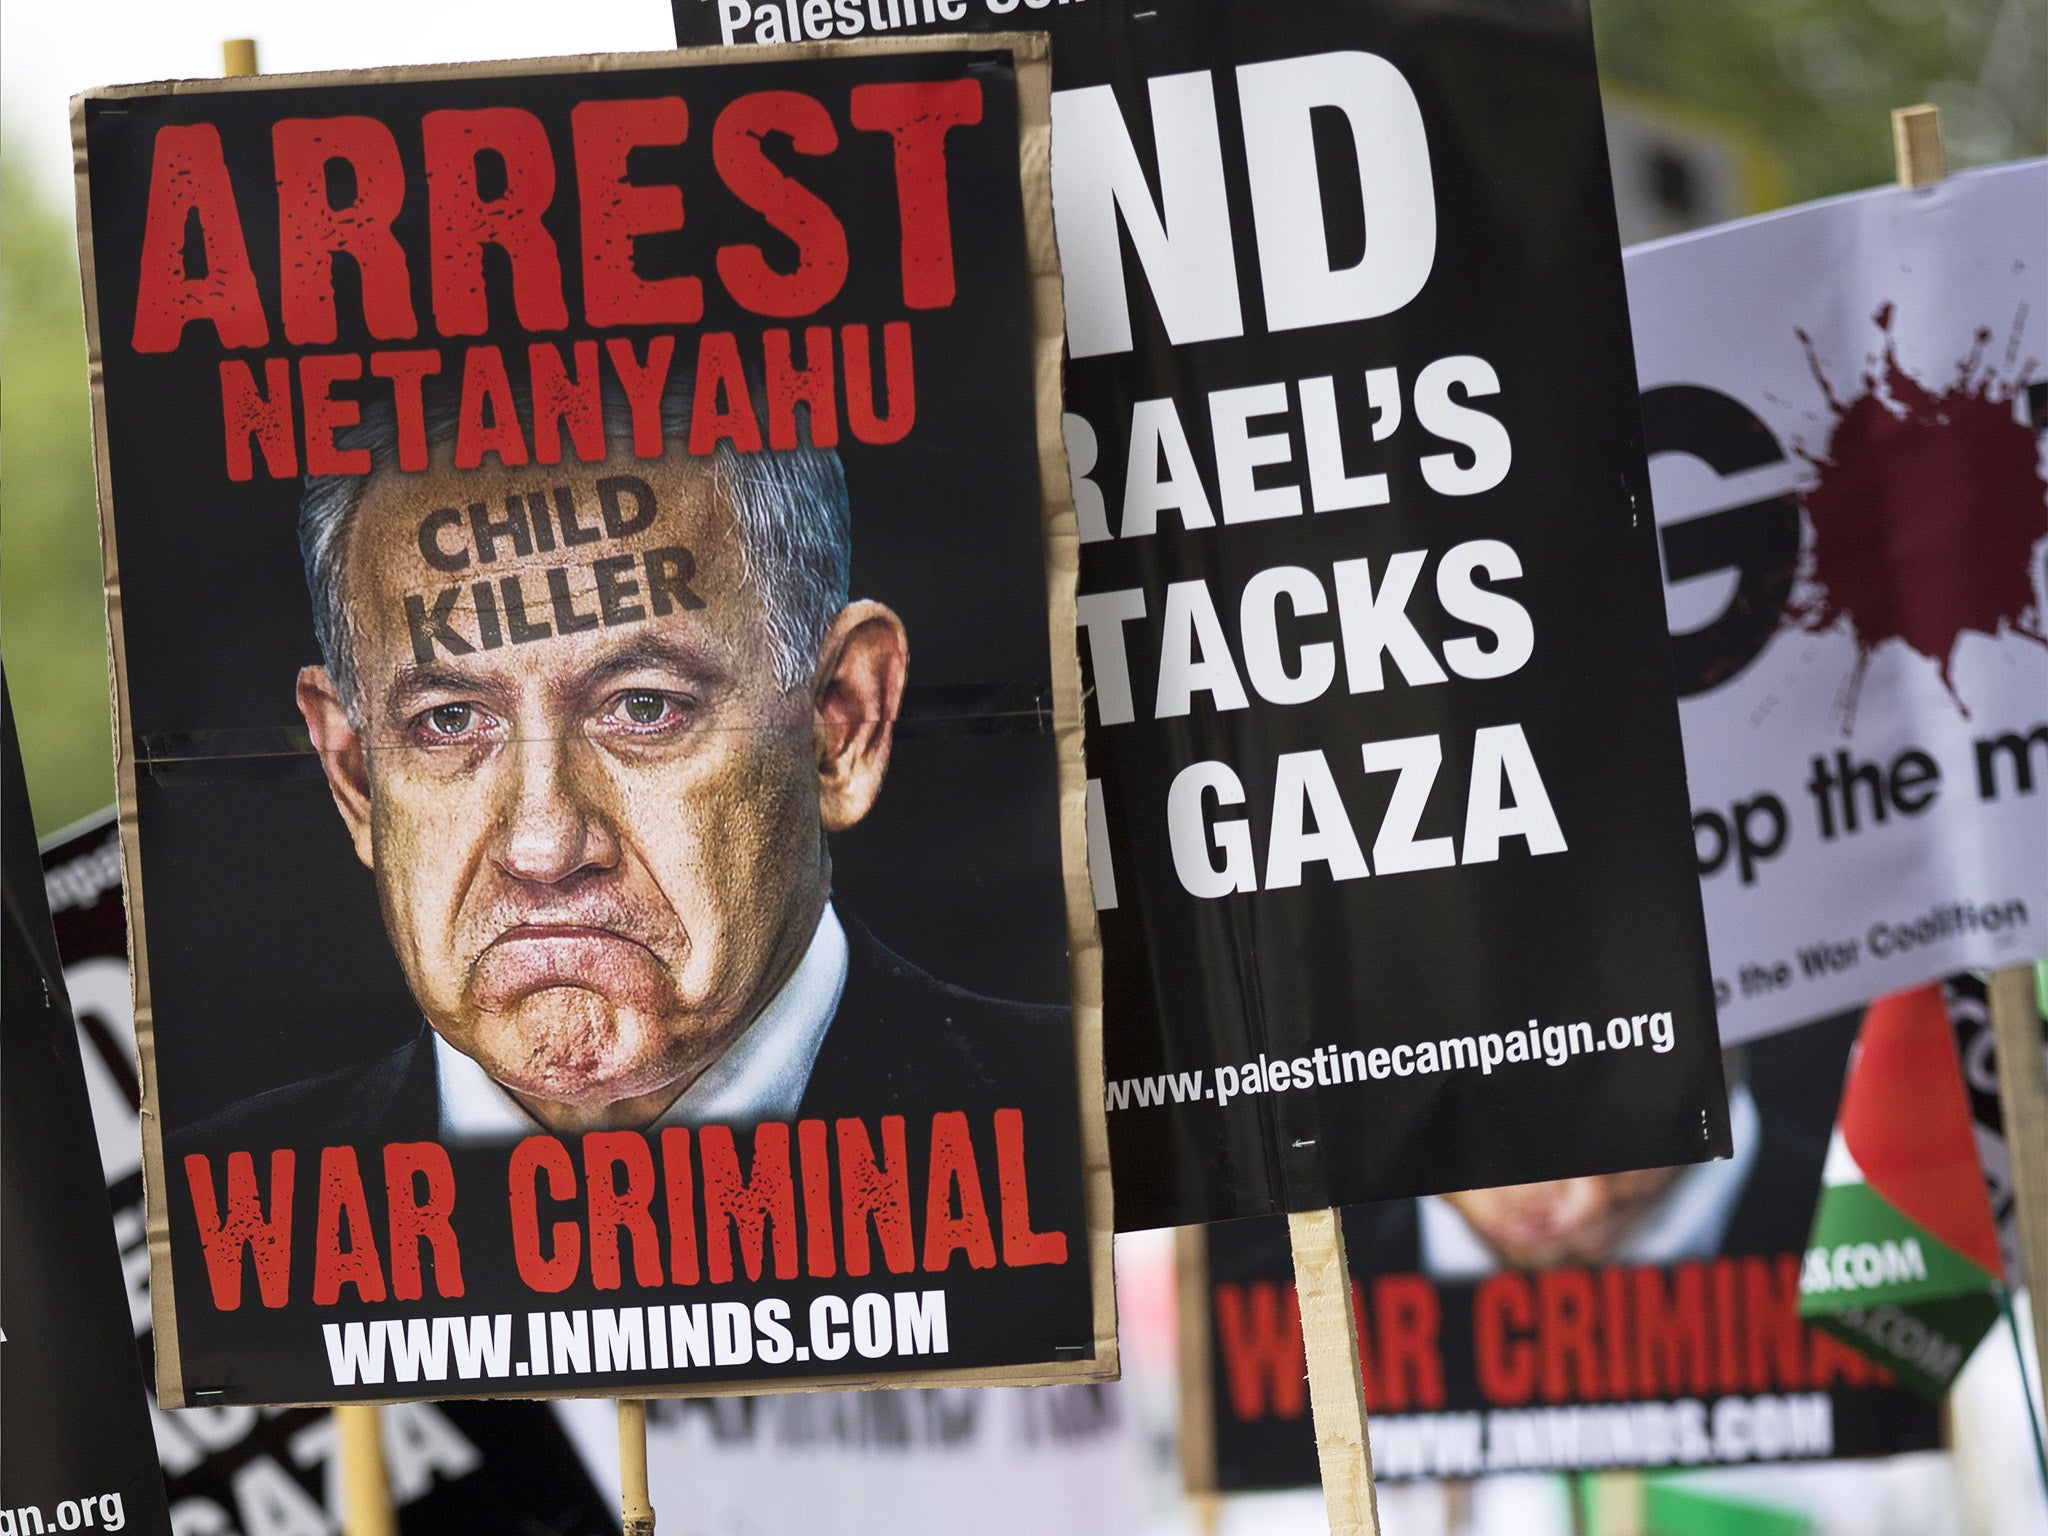 Protesters demanded the UK authorities arrest the Israeli prime minister